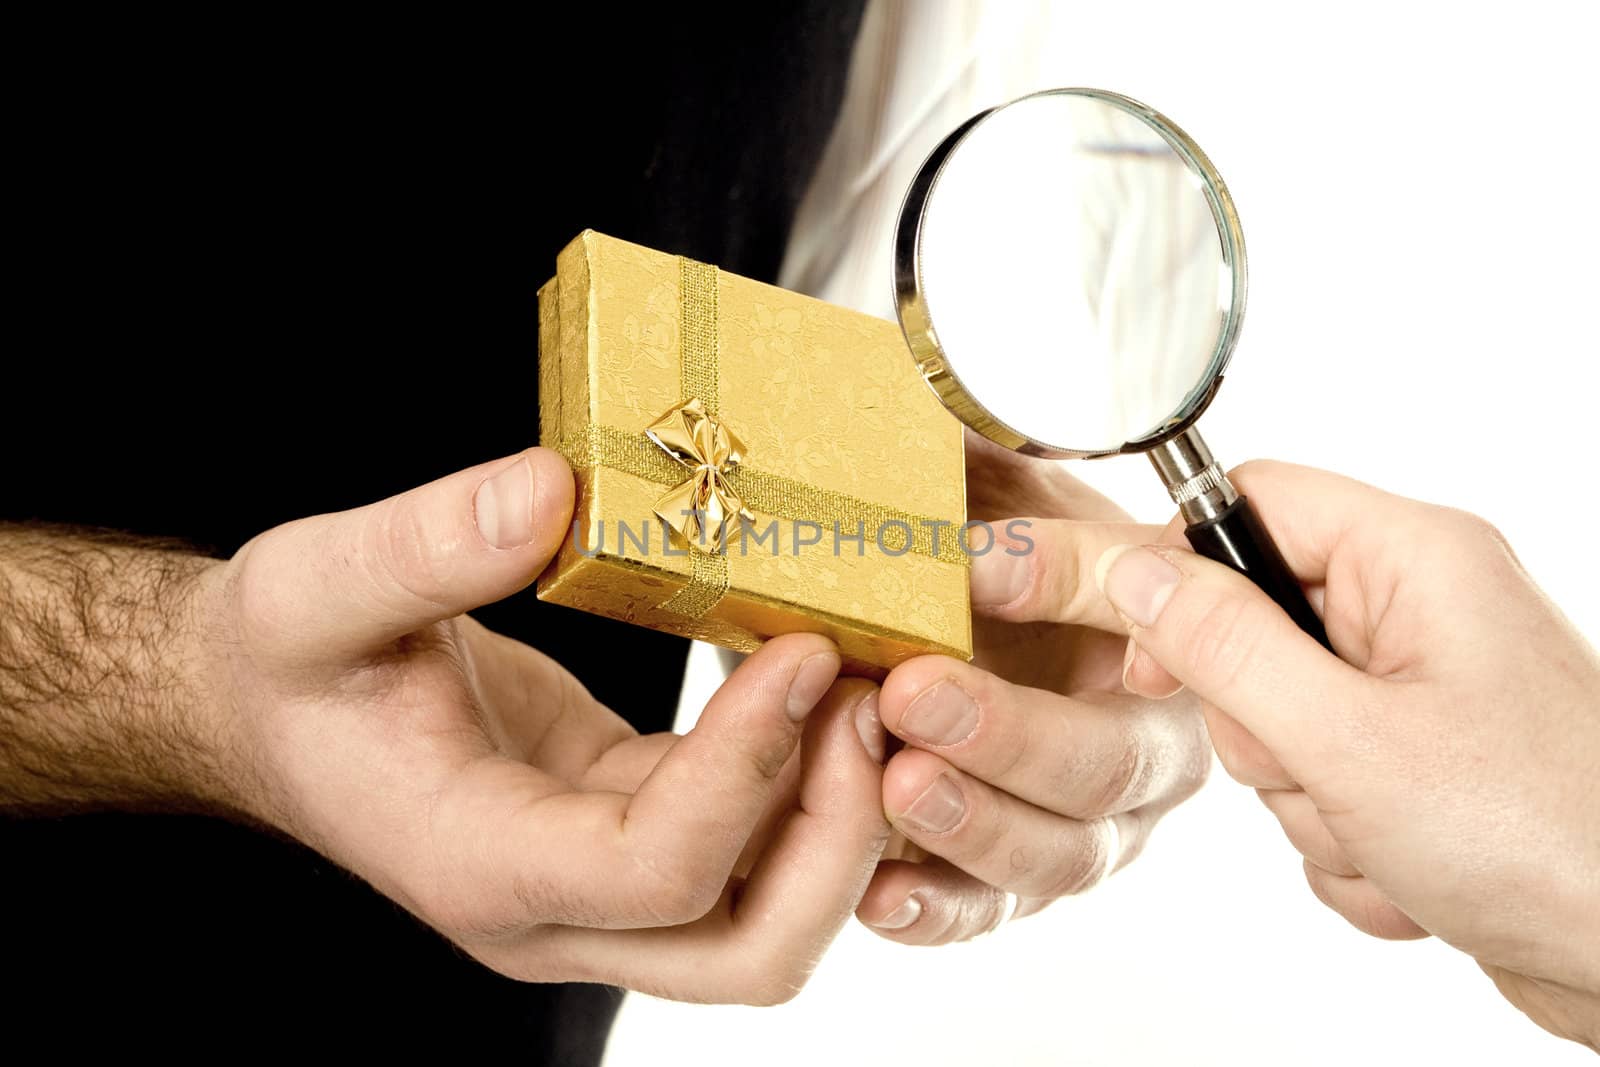 Stock photo: an image of a yellow box in hands of a man and magnifier